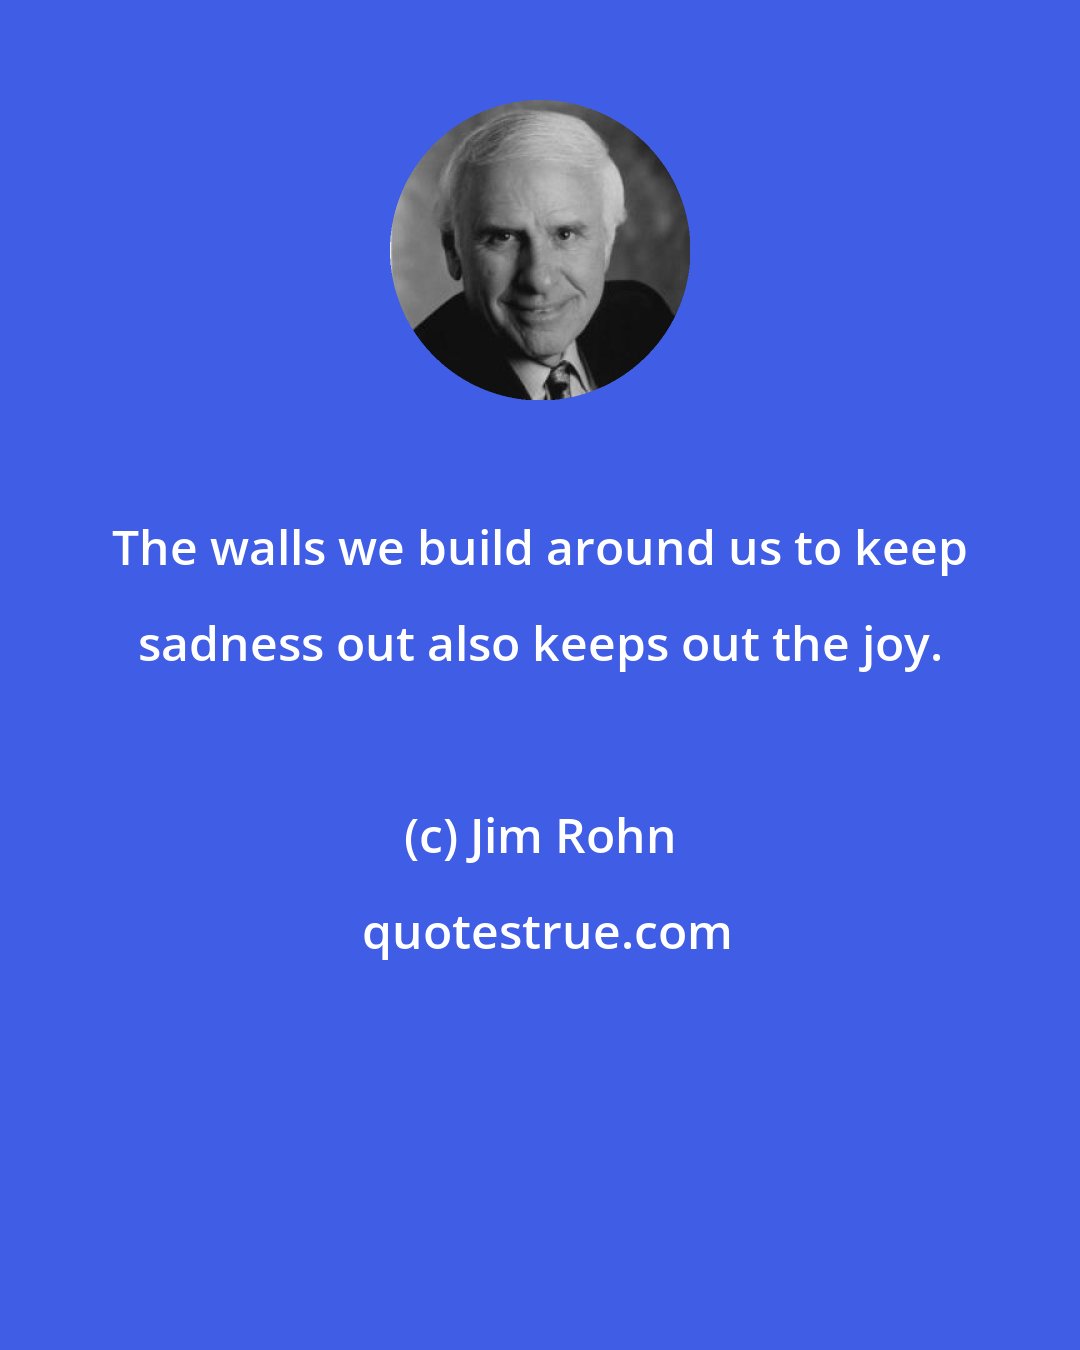 Jim Rohn: The walls we build around us to keep sadness out also keeps out the joy.